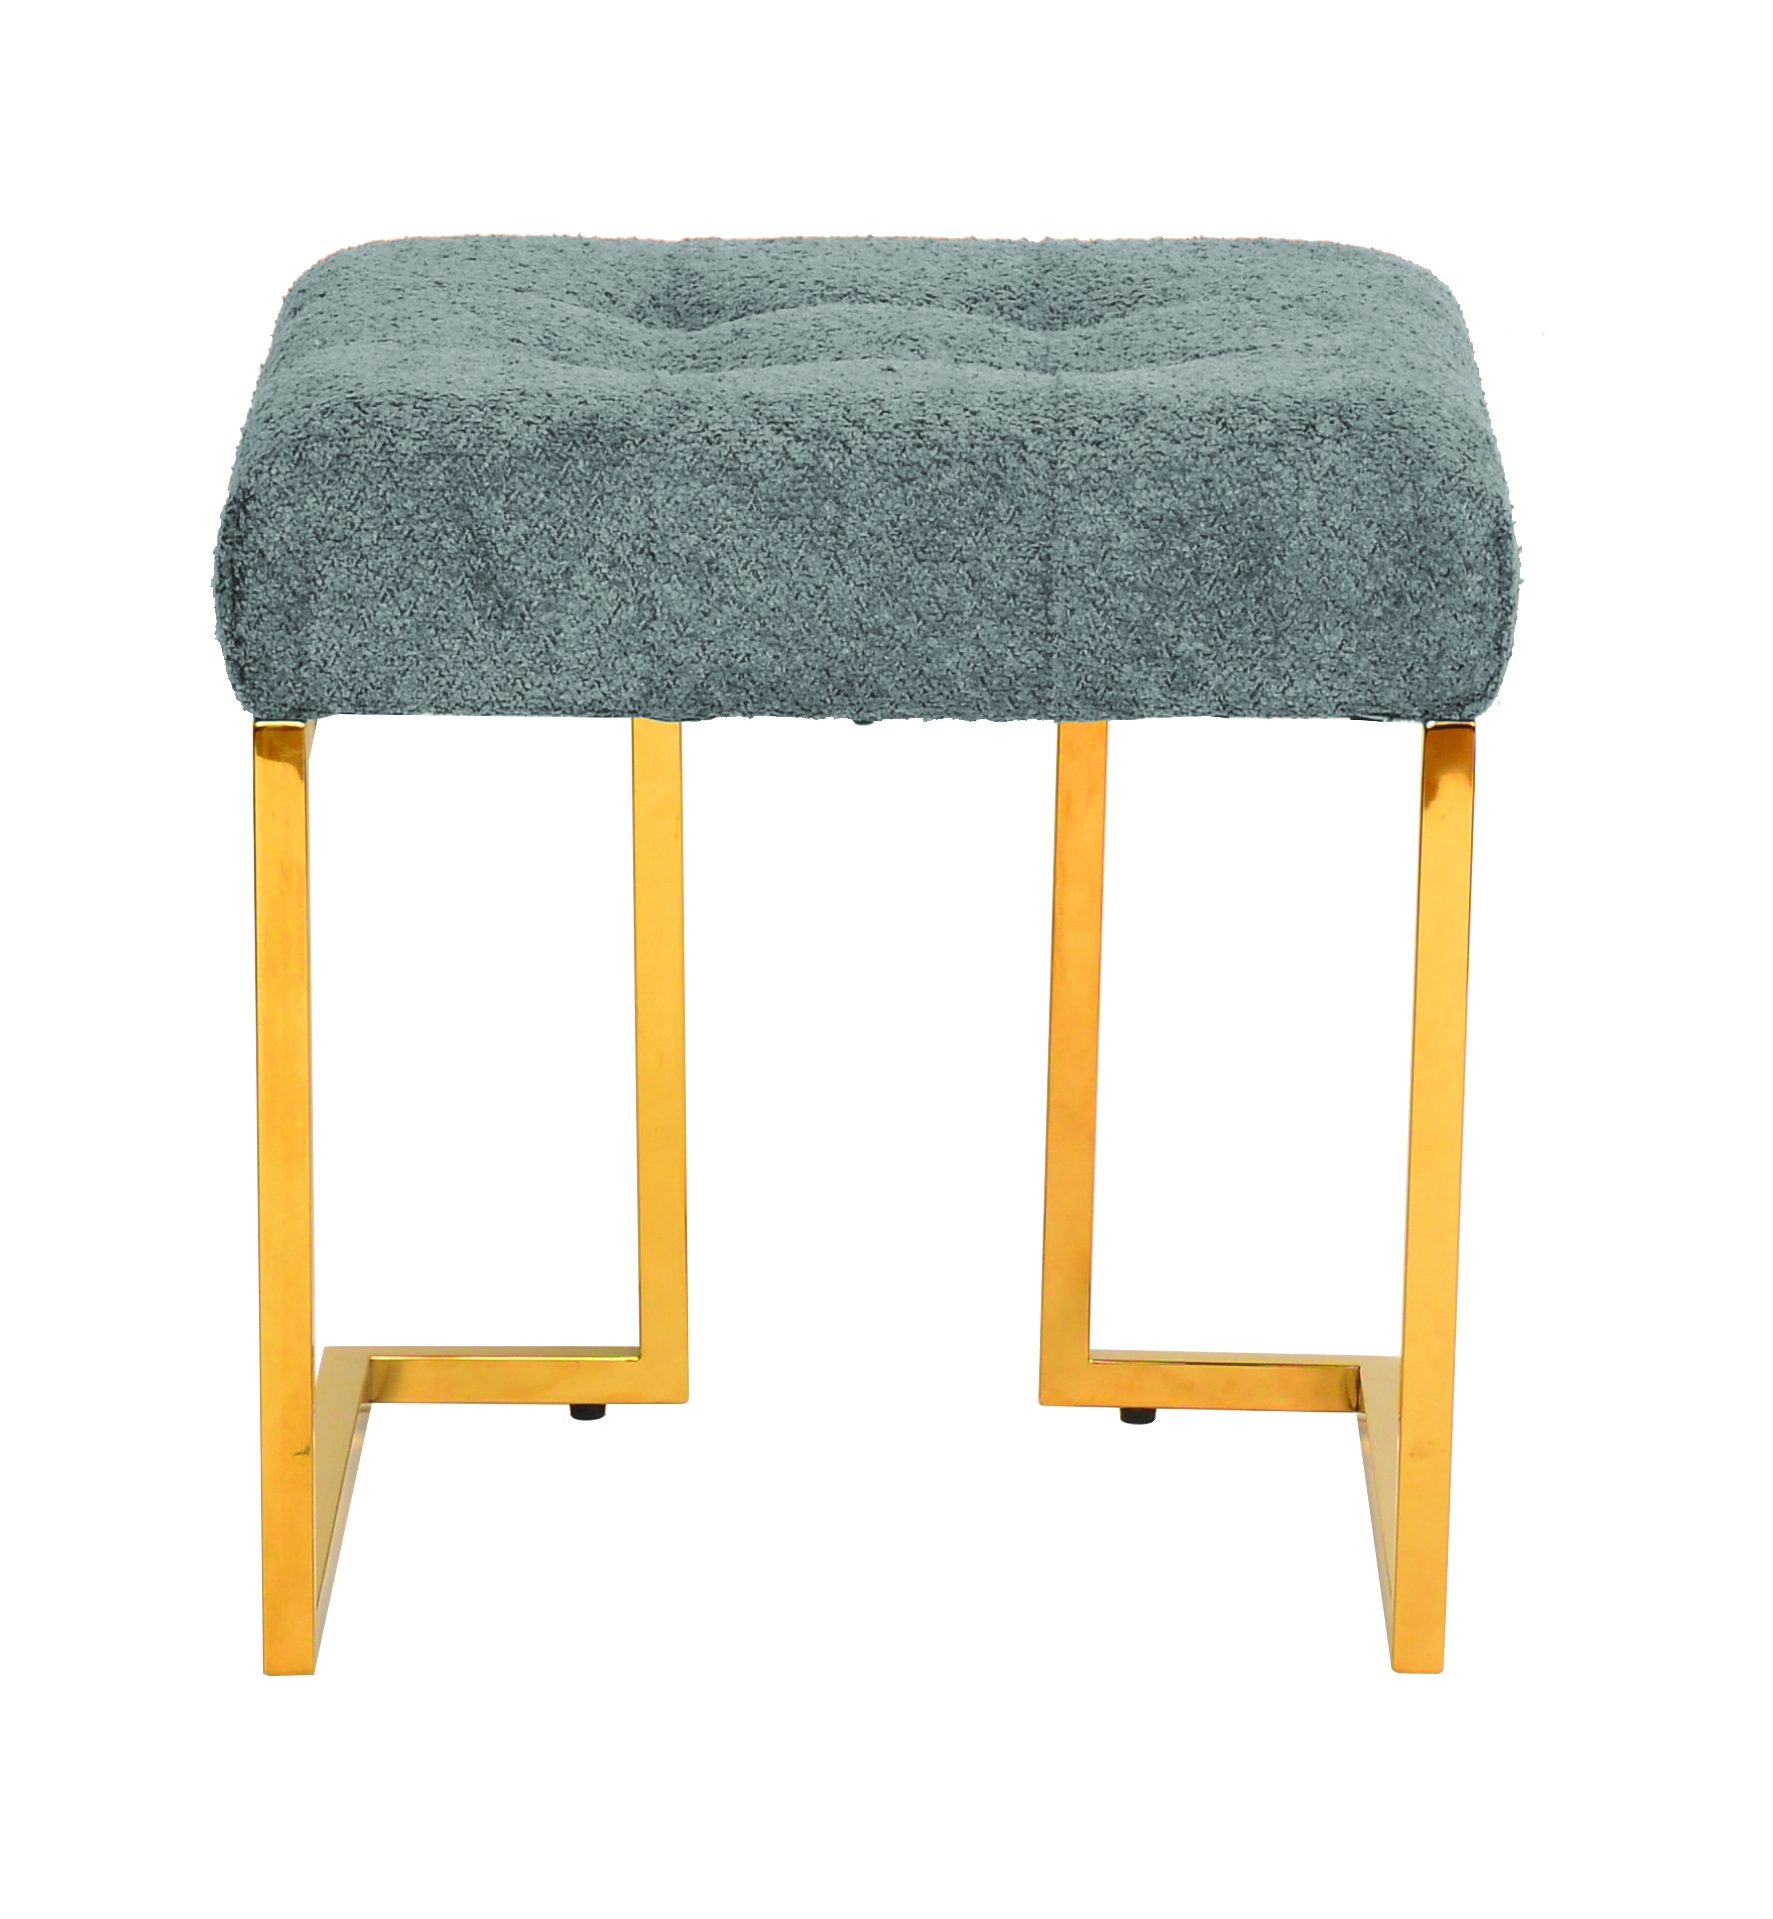 Art Deco Tufted Velvet Upholstered Stool with Stainless Steel Legs, Grey and Gold - Image 0